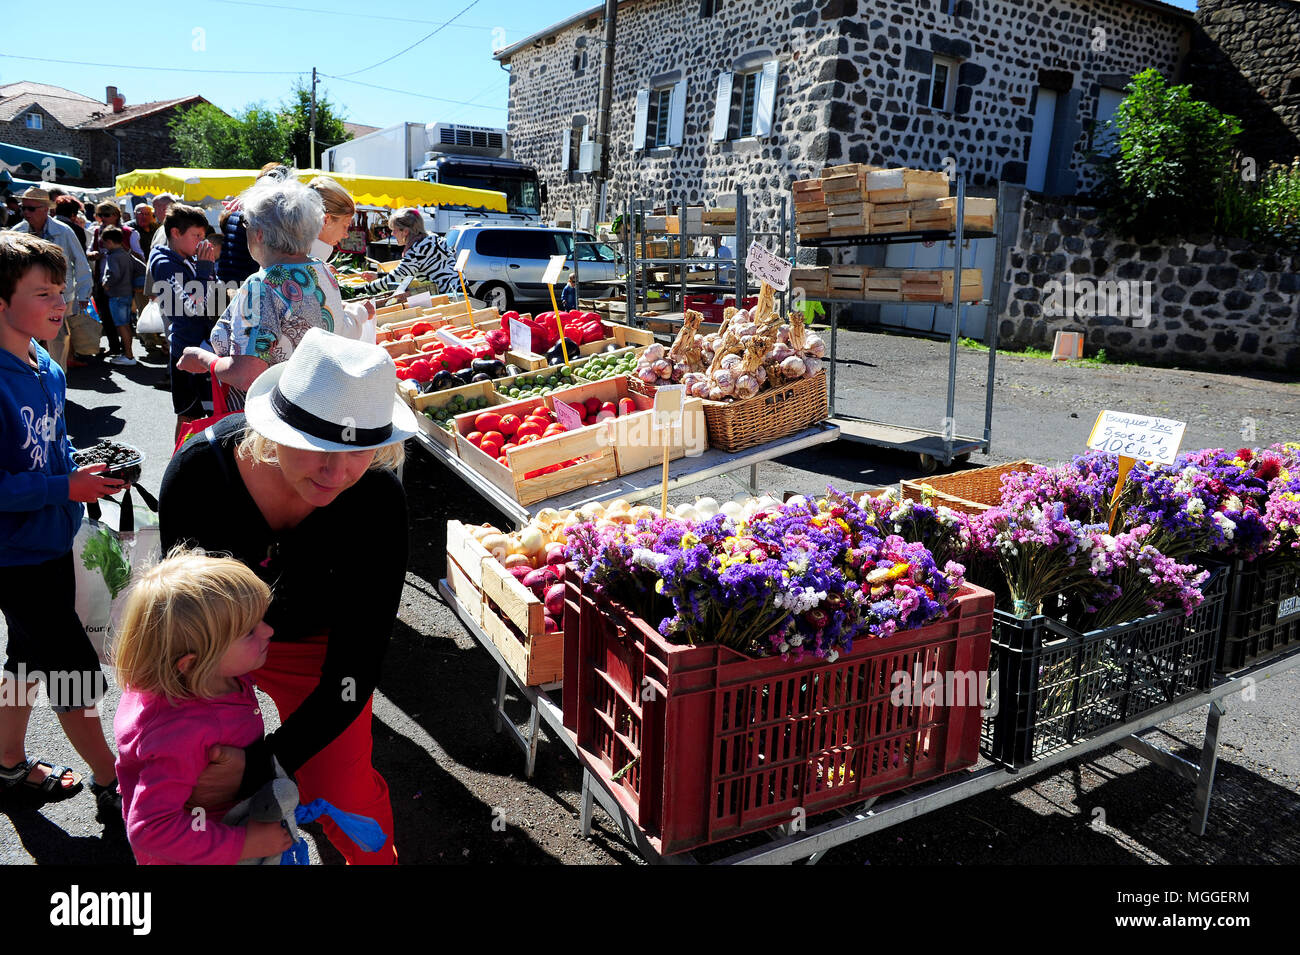 Haute-Loire, France - The weekly market of Costaros - one of the largest ones in the Le Puy region - offers local and organic products. Stock Photo